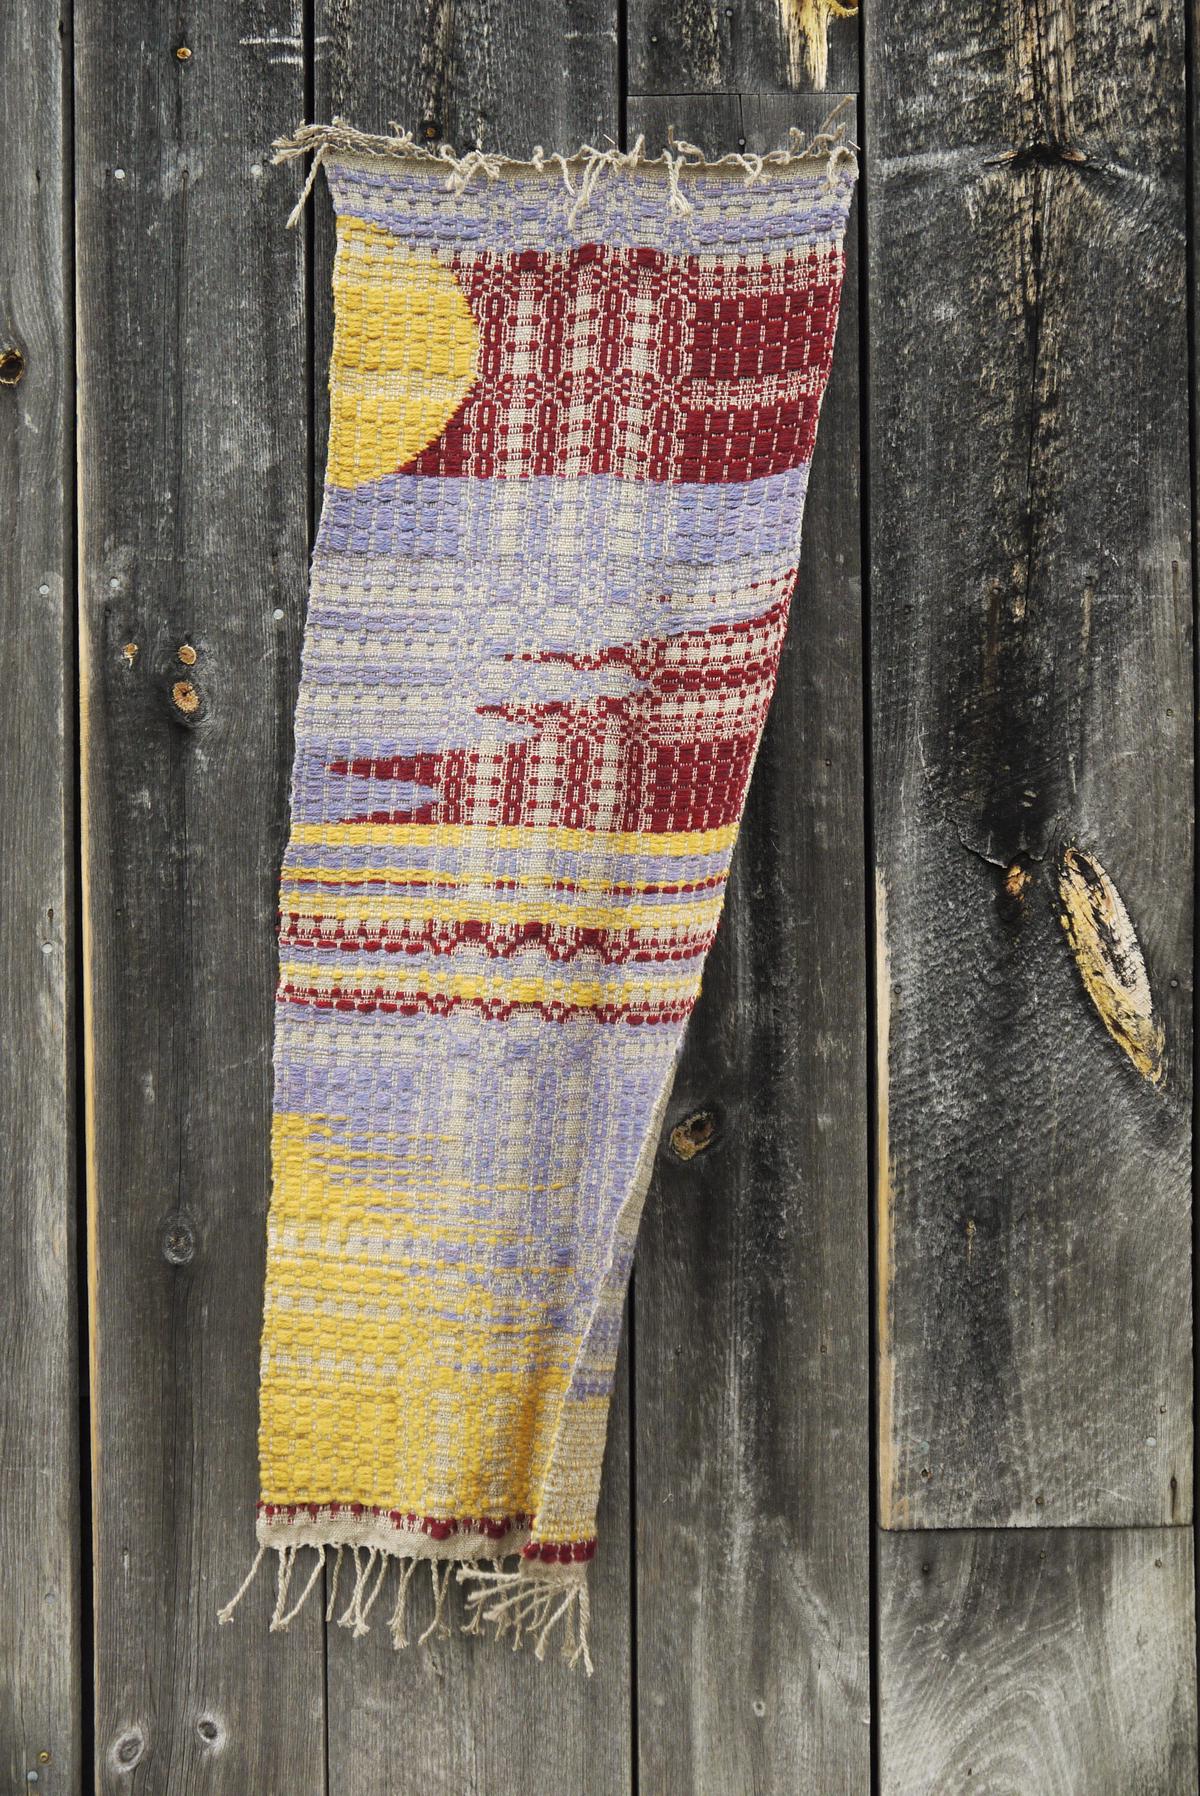 long table runner hanging vertically on the darkened wood wall outside a barn